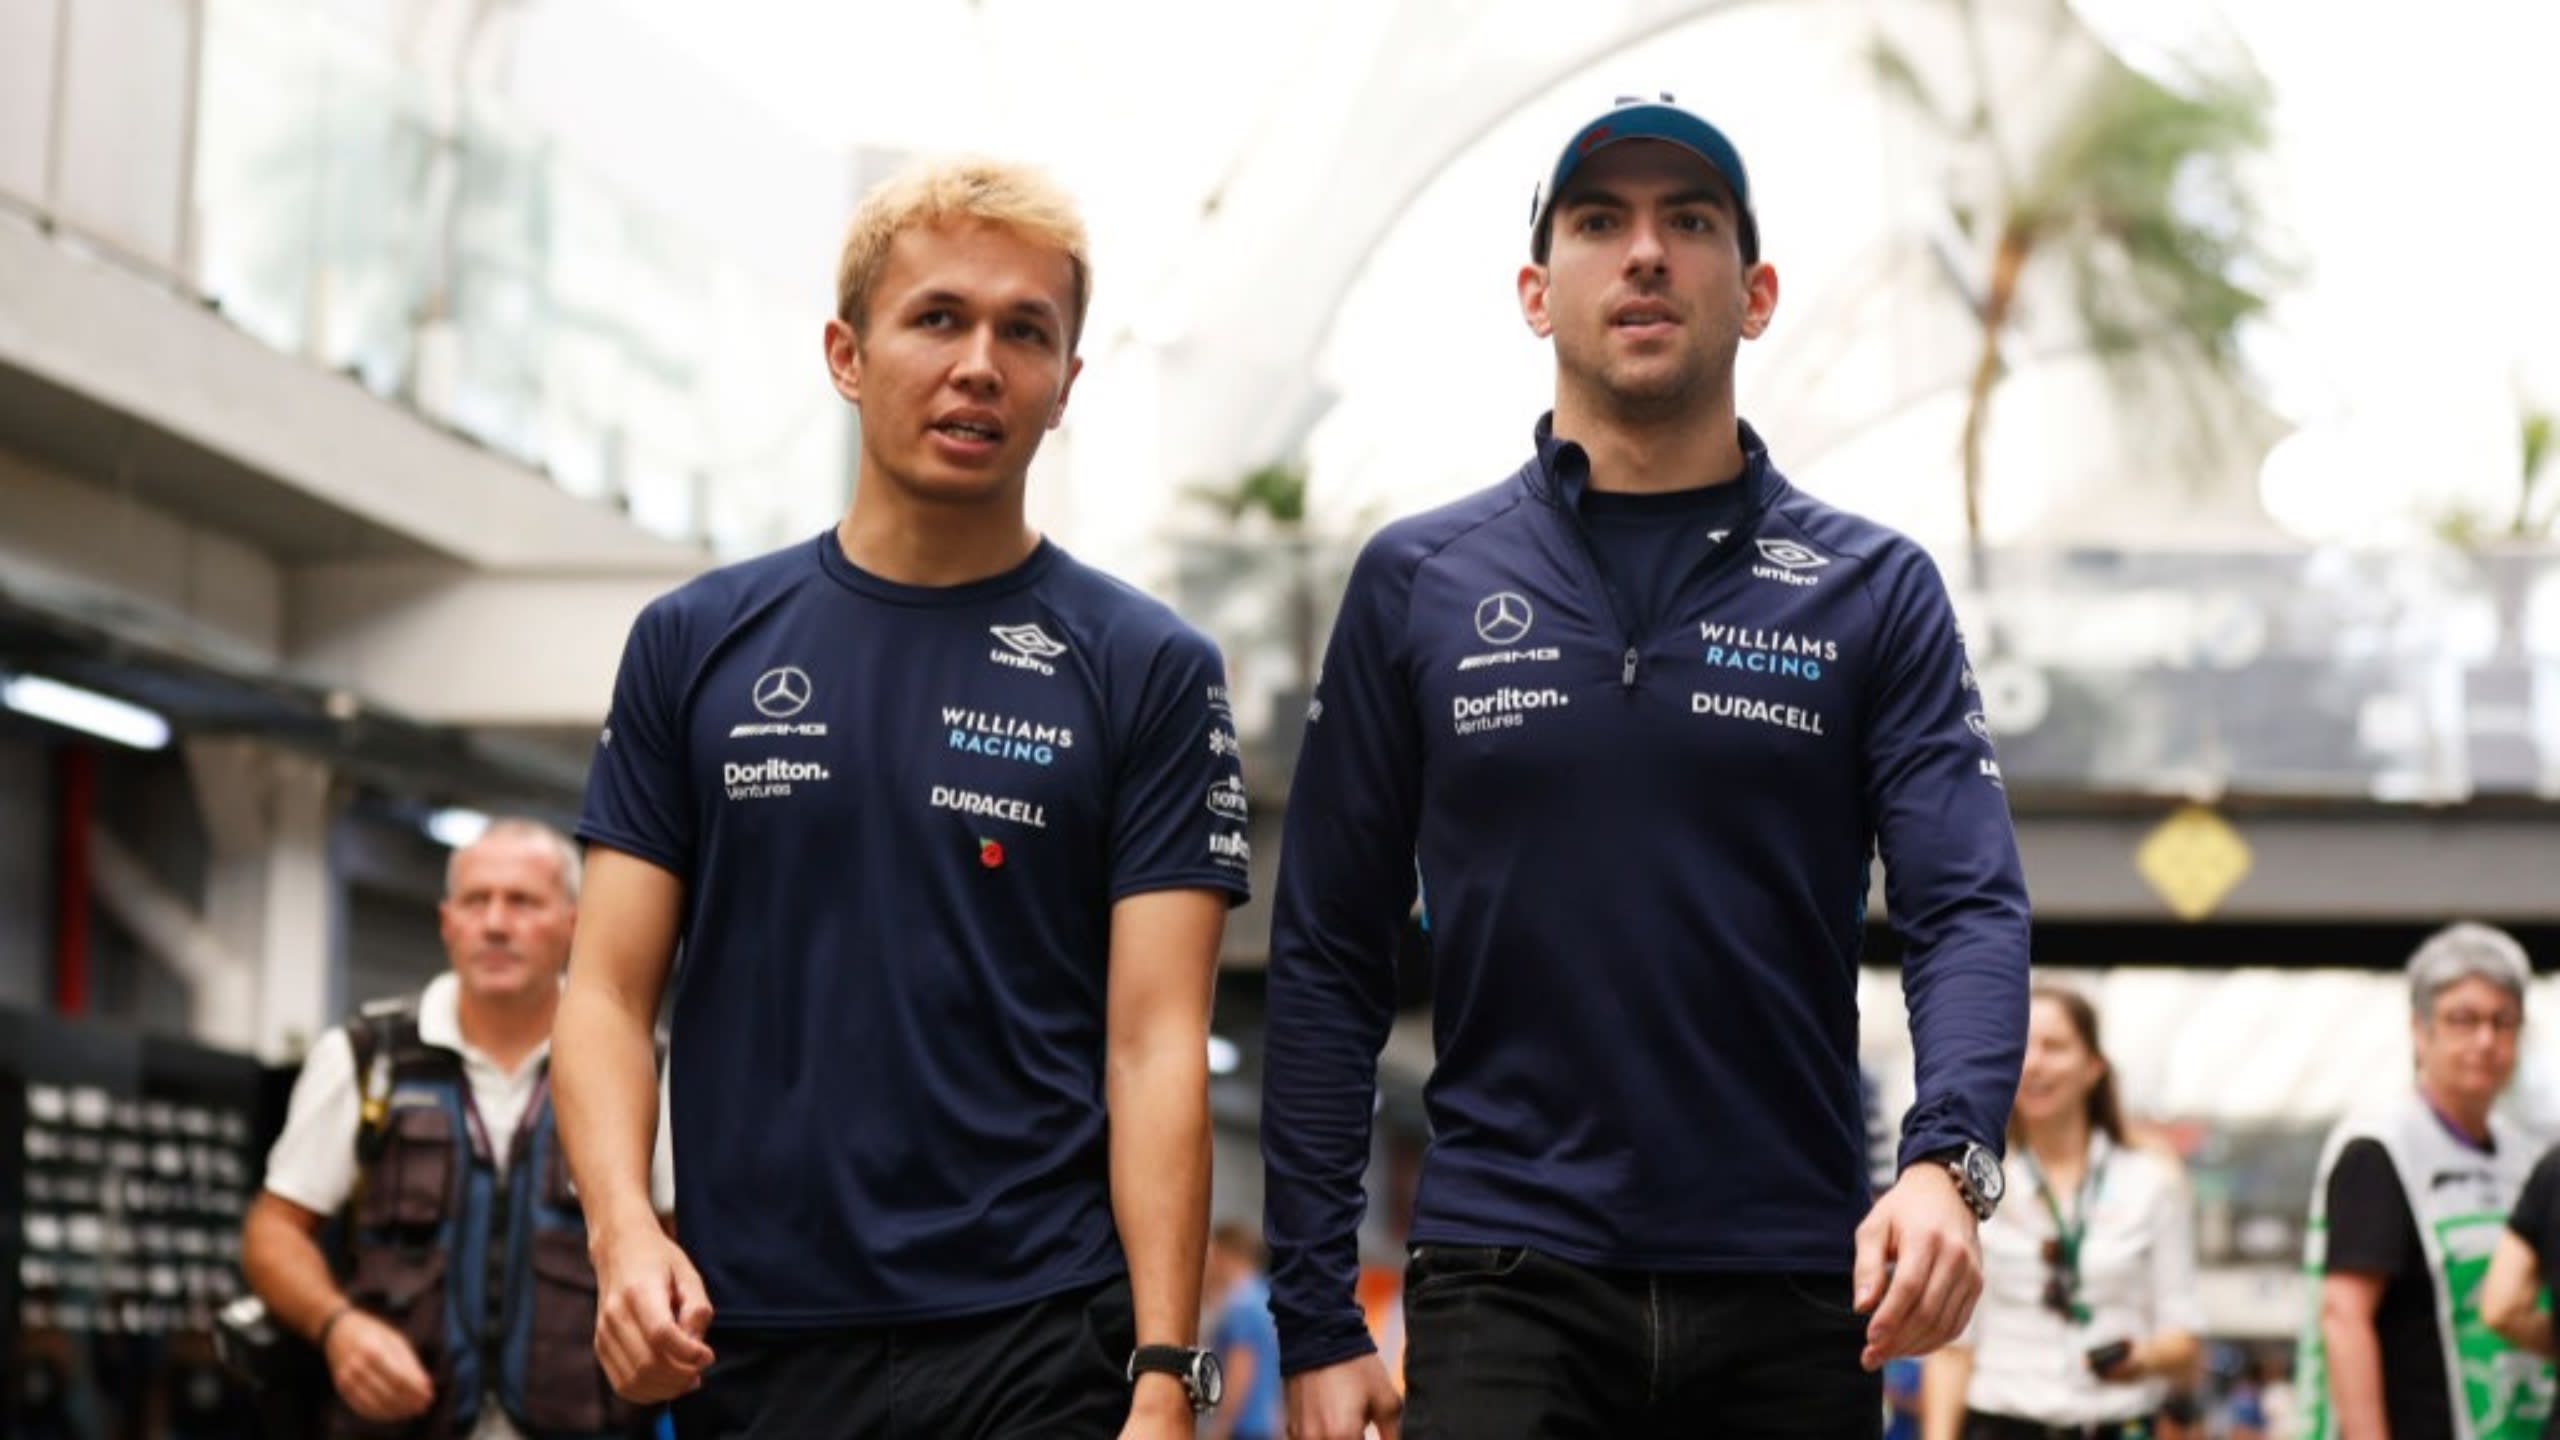 SAO PAULO, BRAZIL - NOVEMBER 11: Alexander Albon of Thailand and Williams and Nicholas Latifi of Canada and Williams walk in the Paddock prior to practice ahead of the F1 Grand Prix of Brazil at Autodromo Jose Carlos Pace on November 11, 2022 in Sao Paulo, Brazil. (Photo by Jared C. Tilton/Getty Images)